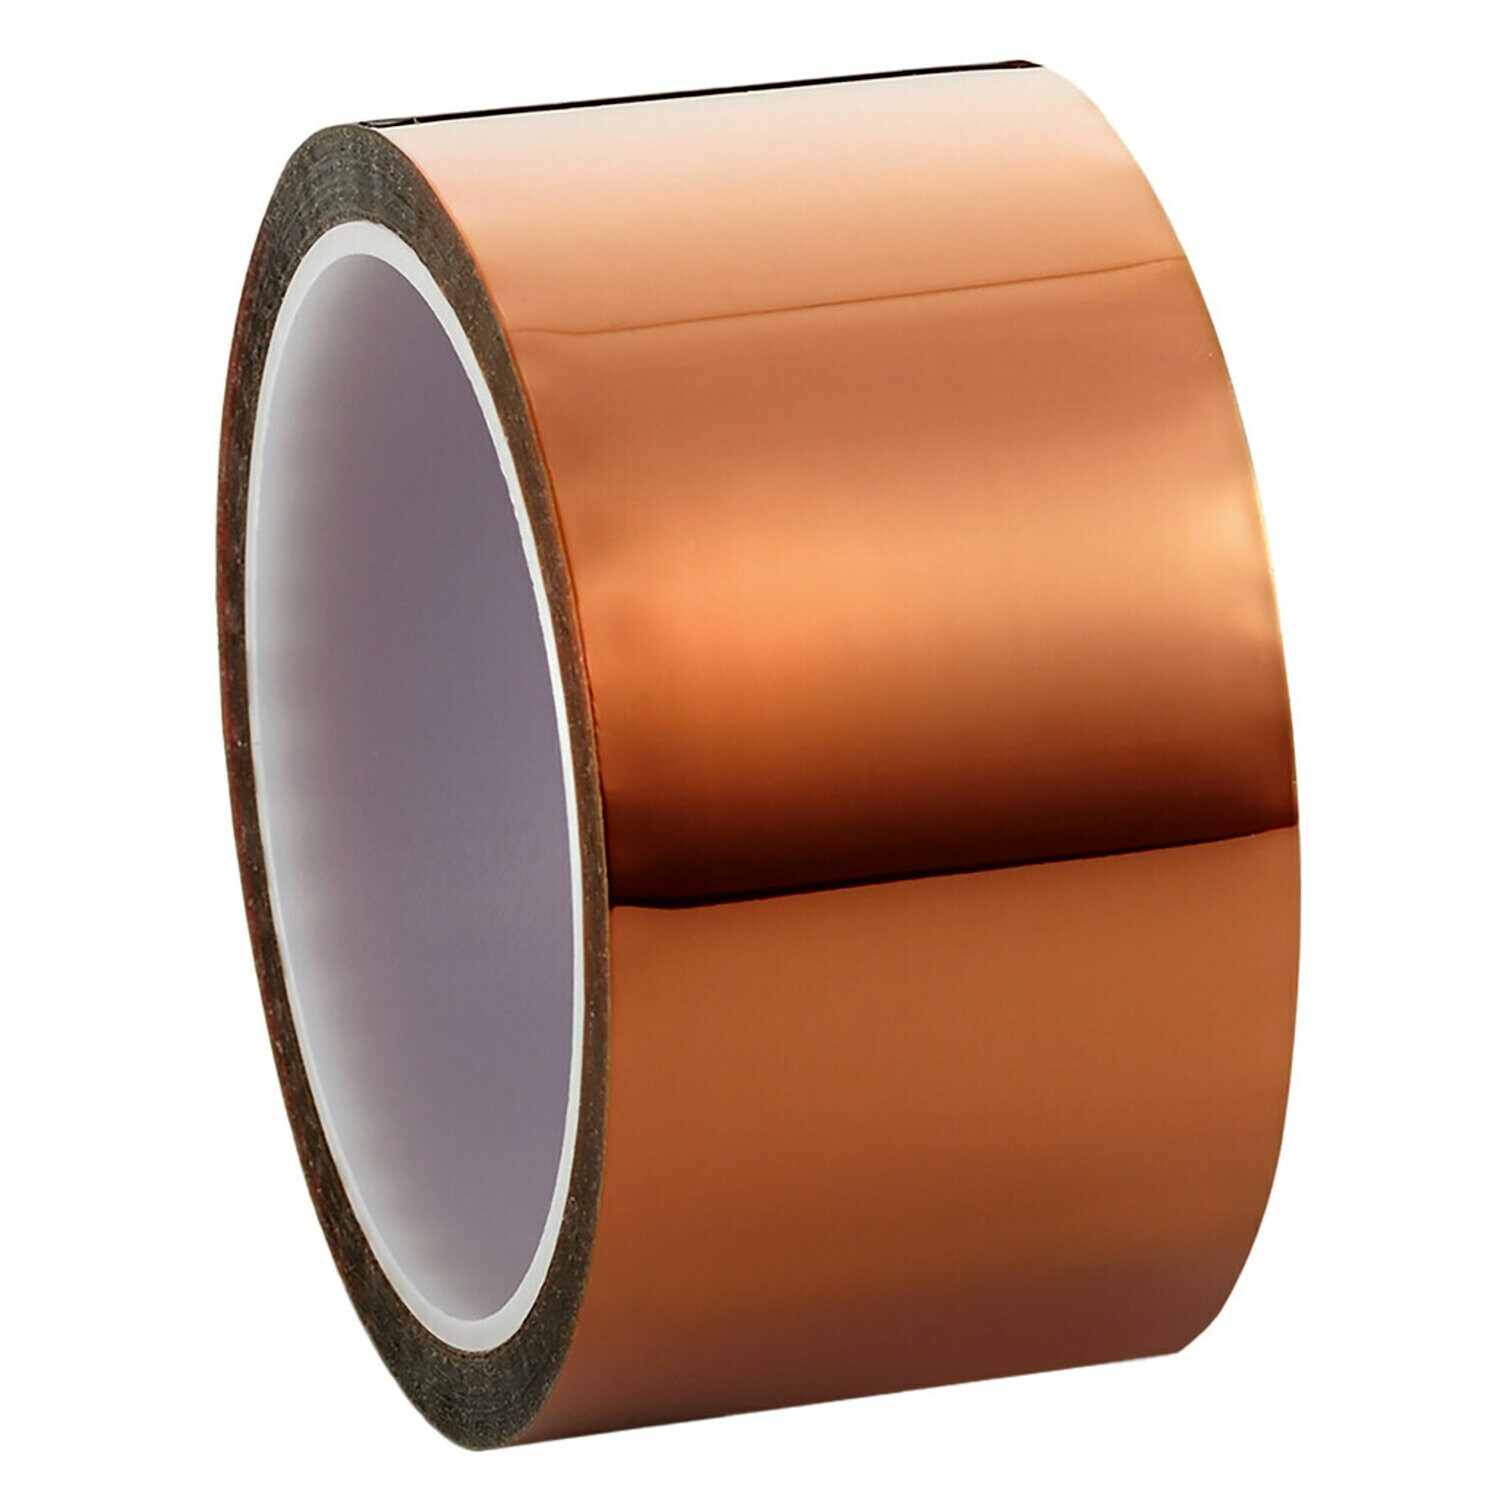 7100059439 - 3M Polyimide Tape 8997, Light Amber, 4 in x 36 yd, 2.2 mil, 8 rolls per
case